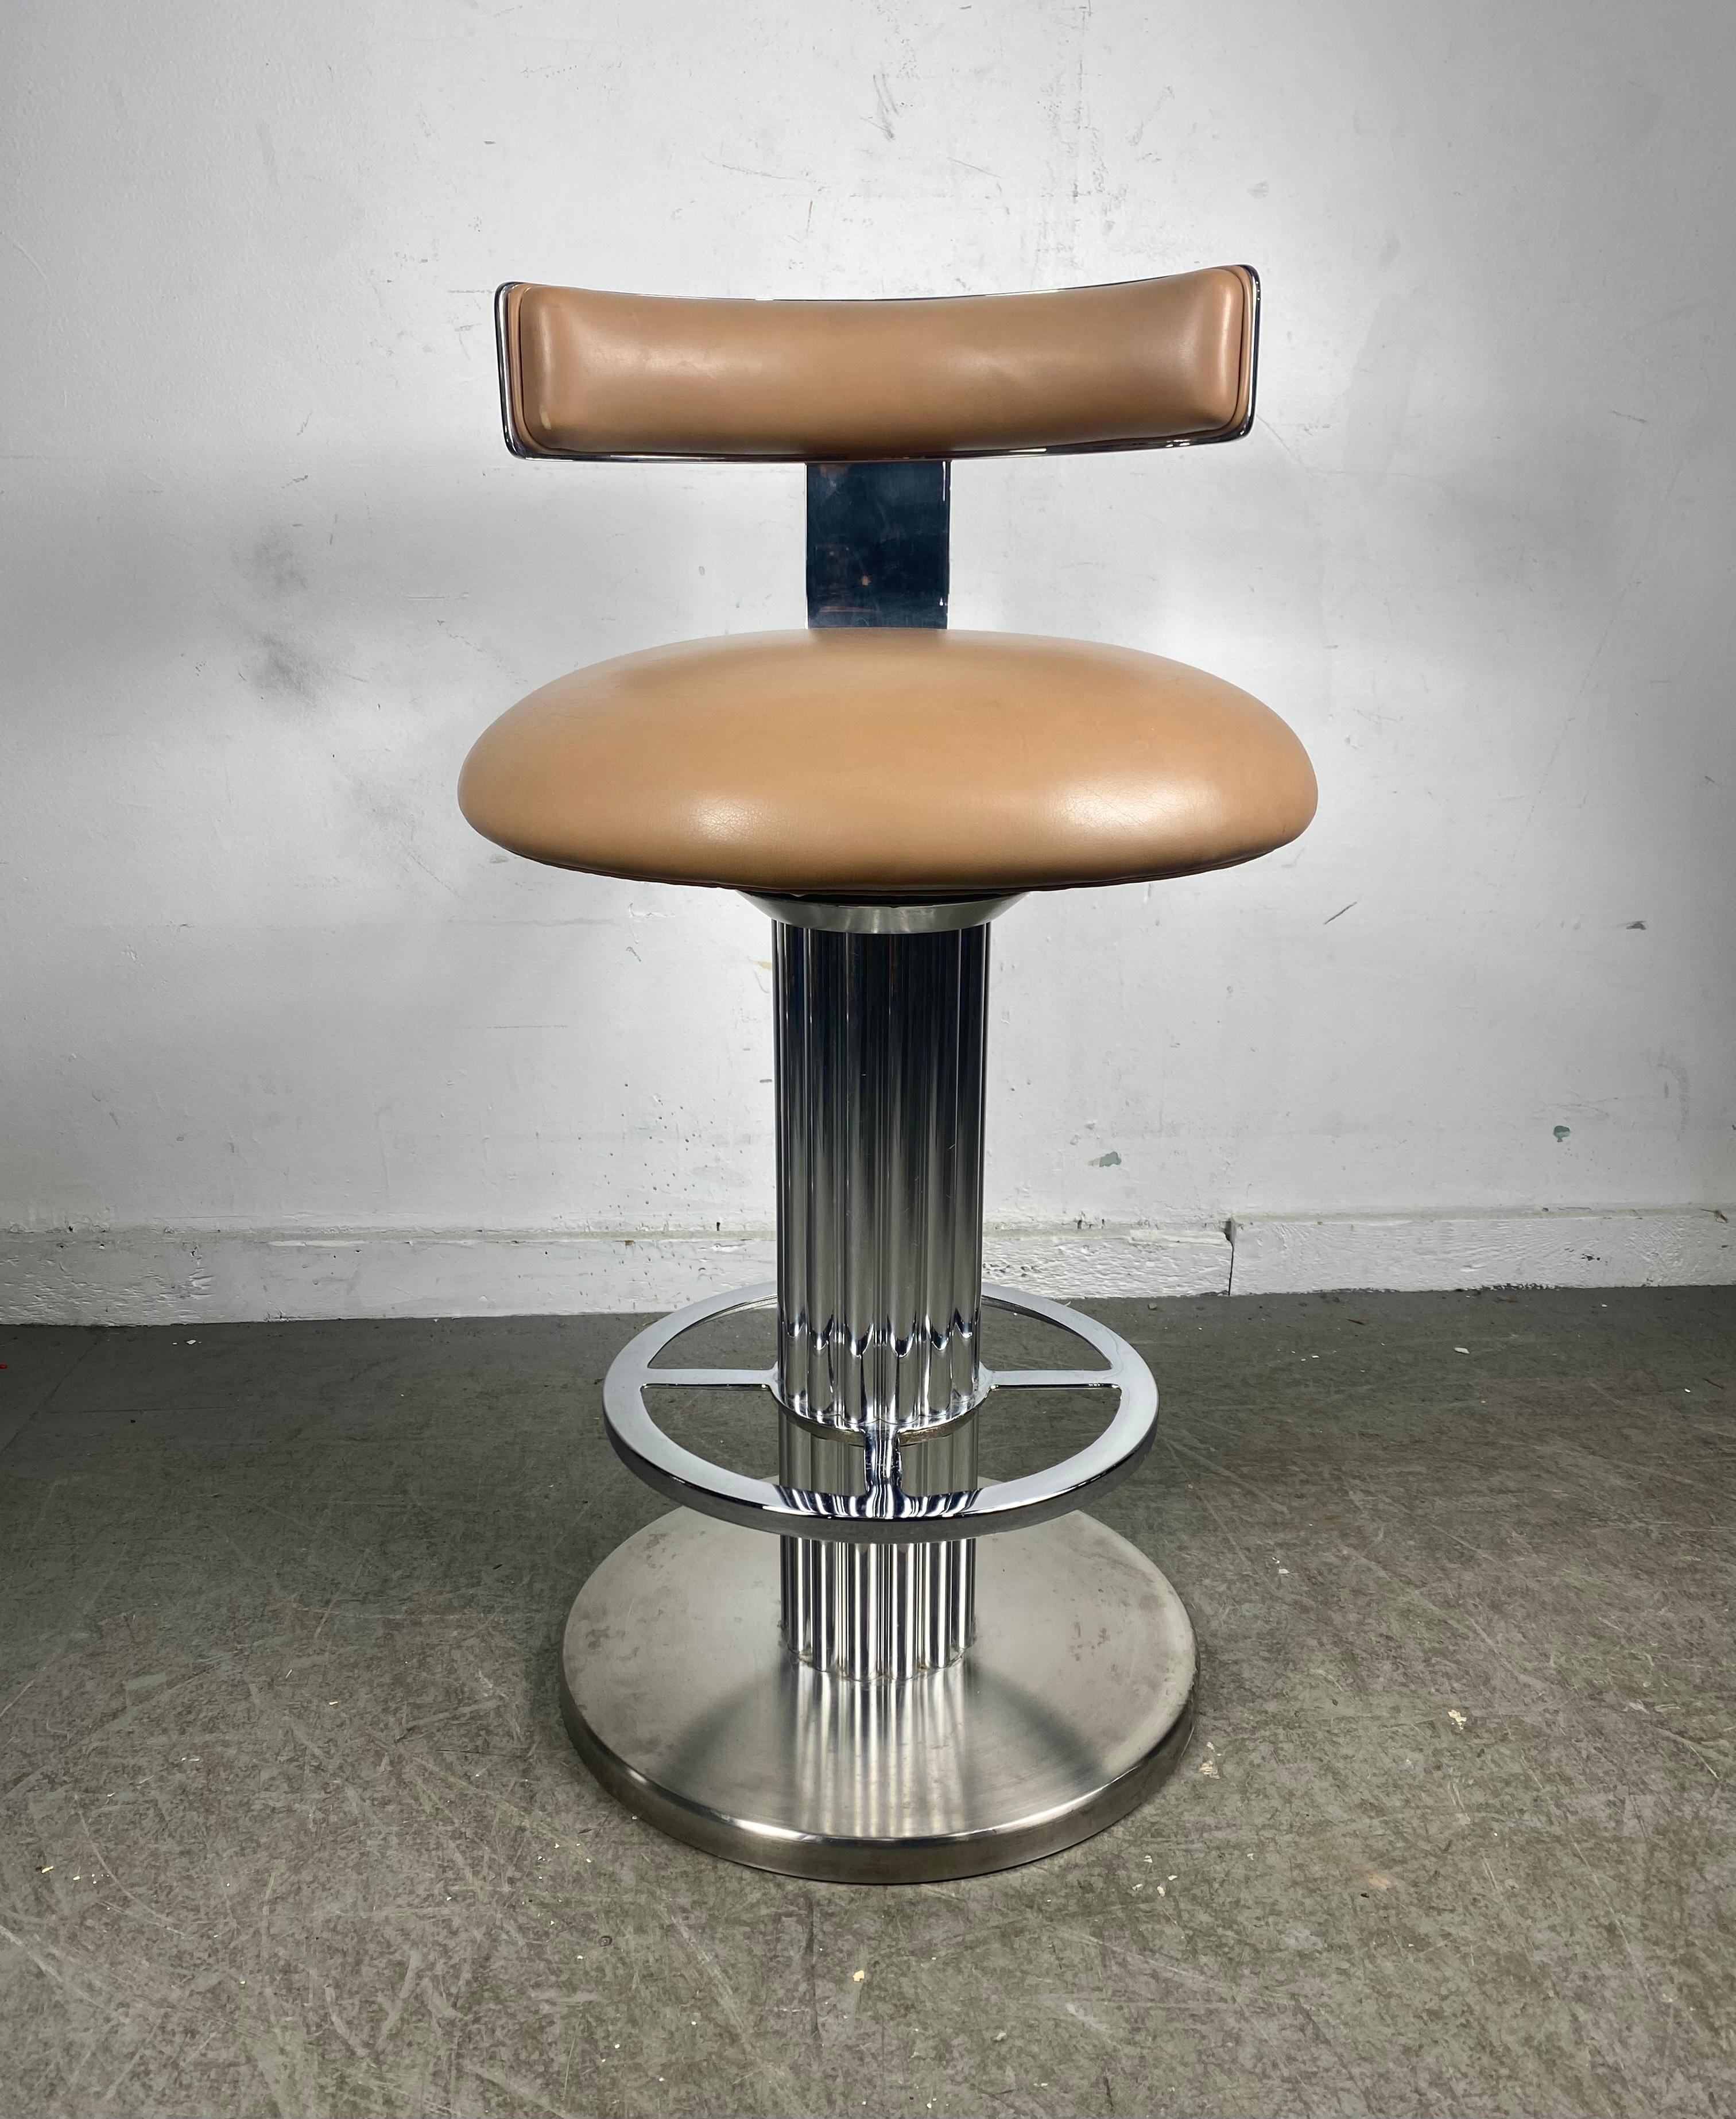 Stunning Set of Art Deco Revival Chromed Nickel swivel bar/counter stools by Design for Leisure. Amazing design, retain their original leather upholstery, which does show minor signs of wear however remains intact with no rips or tears.Superior